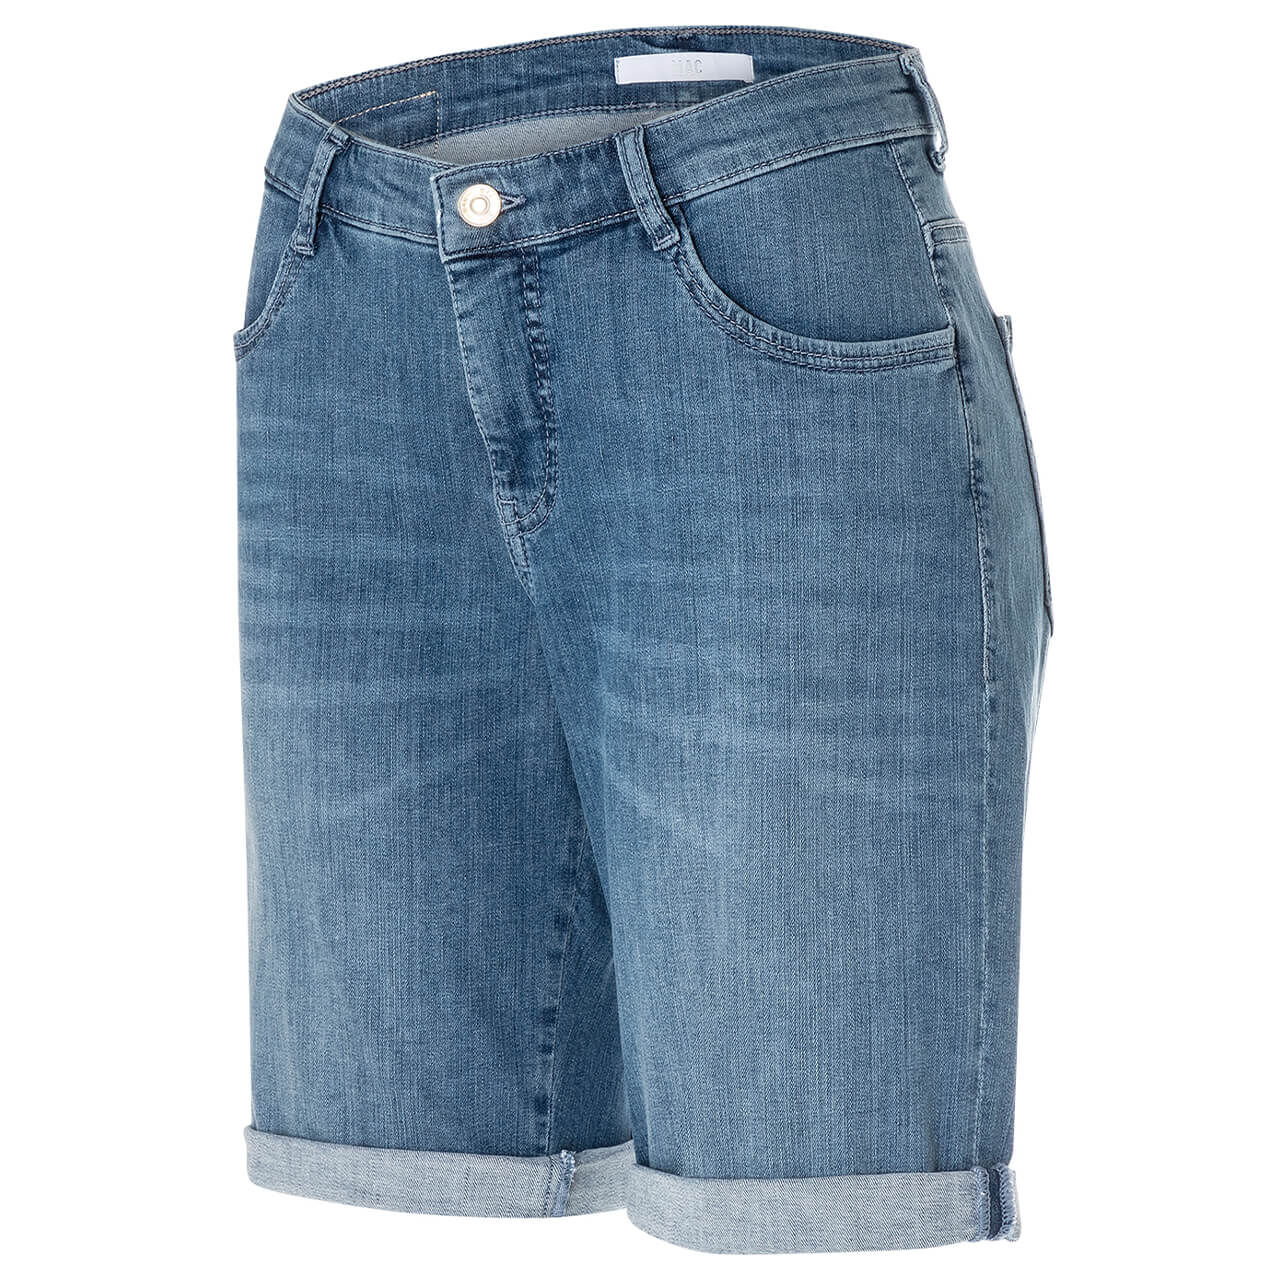 MAC Shorty Jeans mid blue wash summer clean